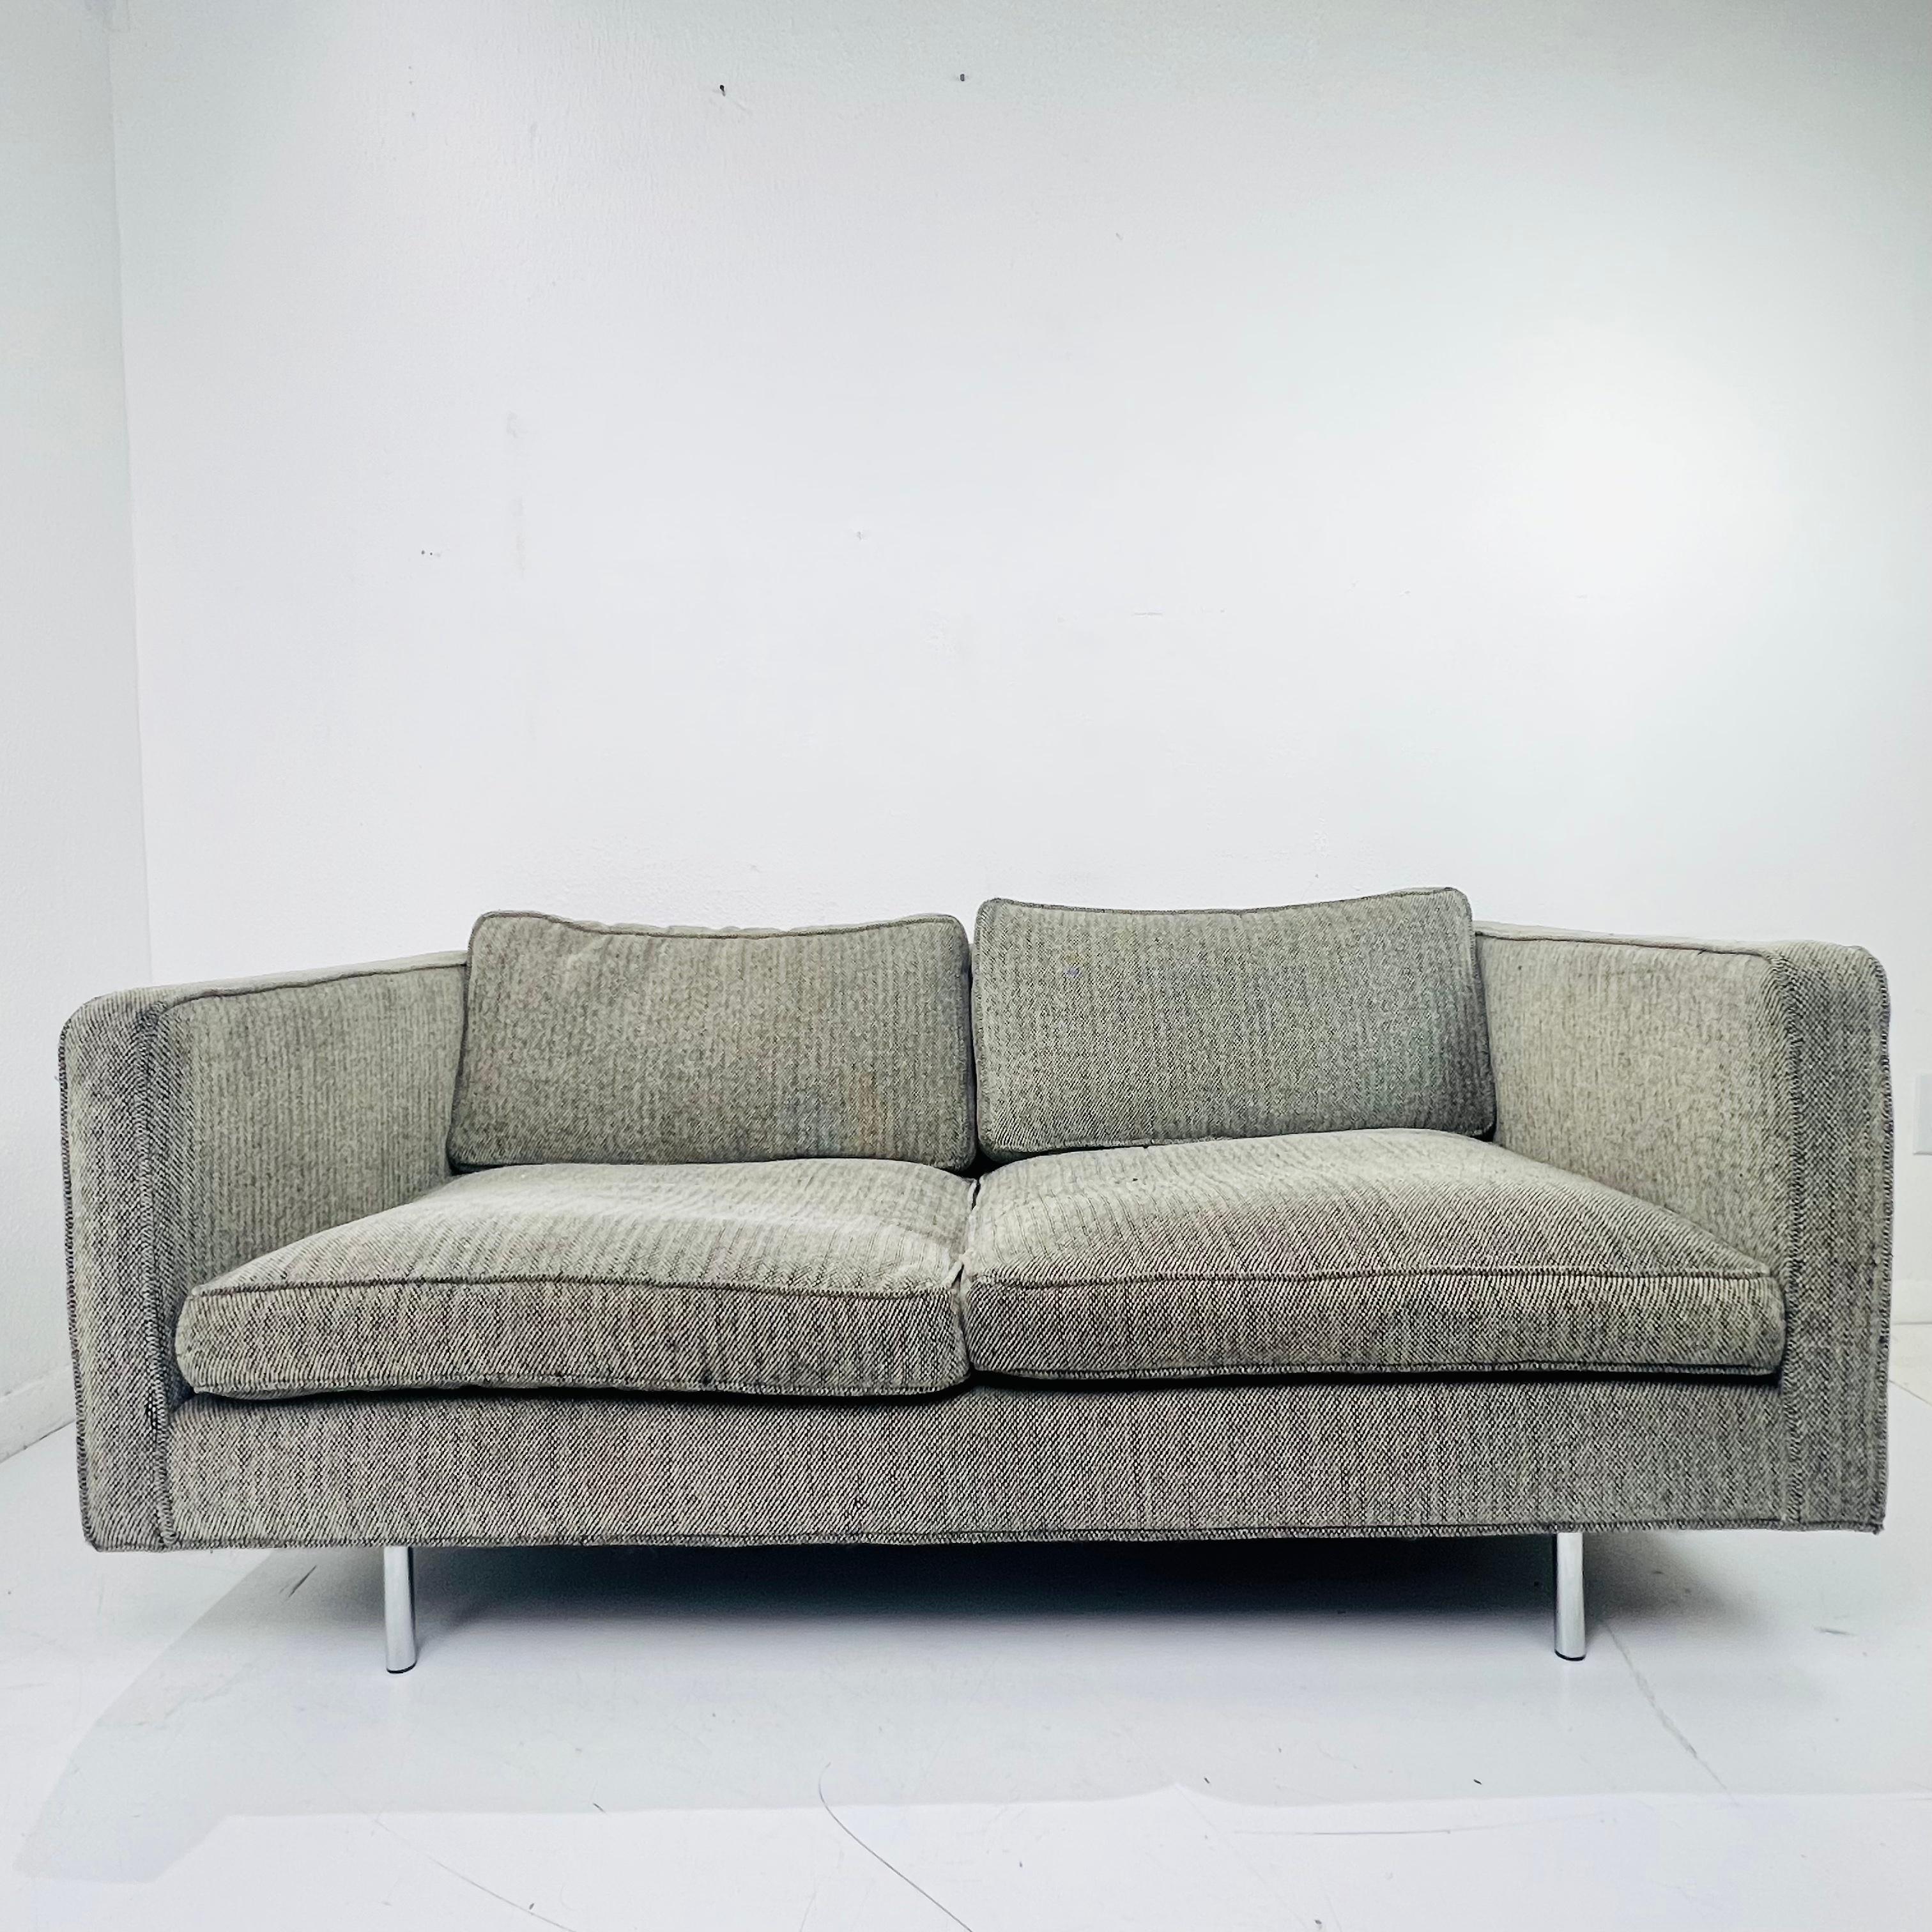 Perfectly sized 1970s Knoll loveseat. 2 seats rest on chrome legs. Fabric shows wear and imperfections from age and use. Frame in good condition; reupholstery with new foam/straps recommended. Ask us for a quote! 